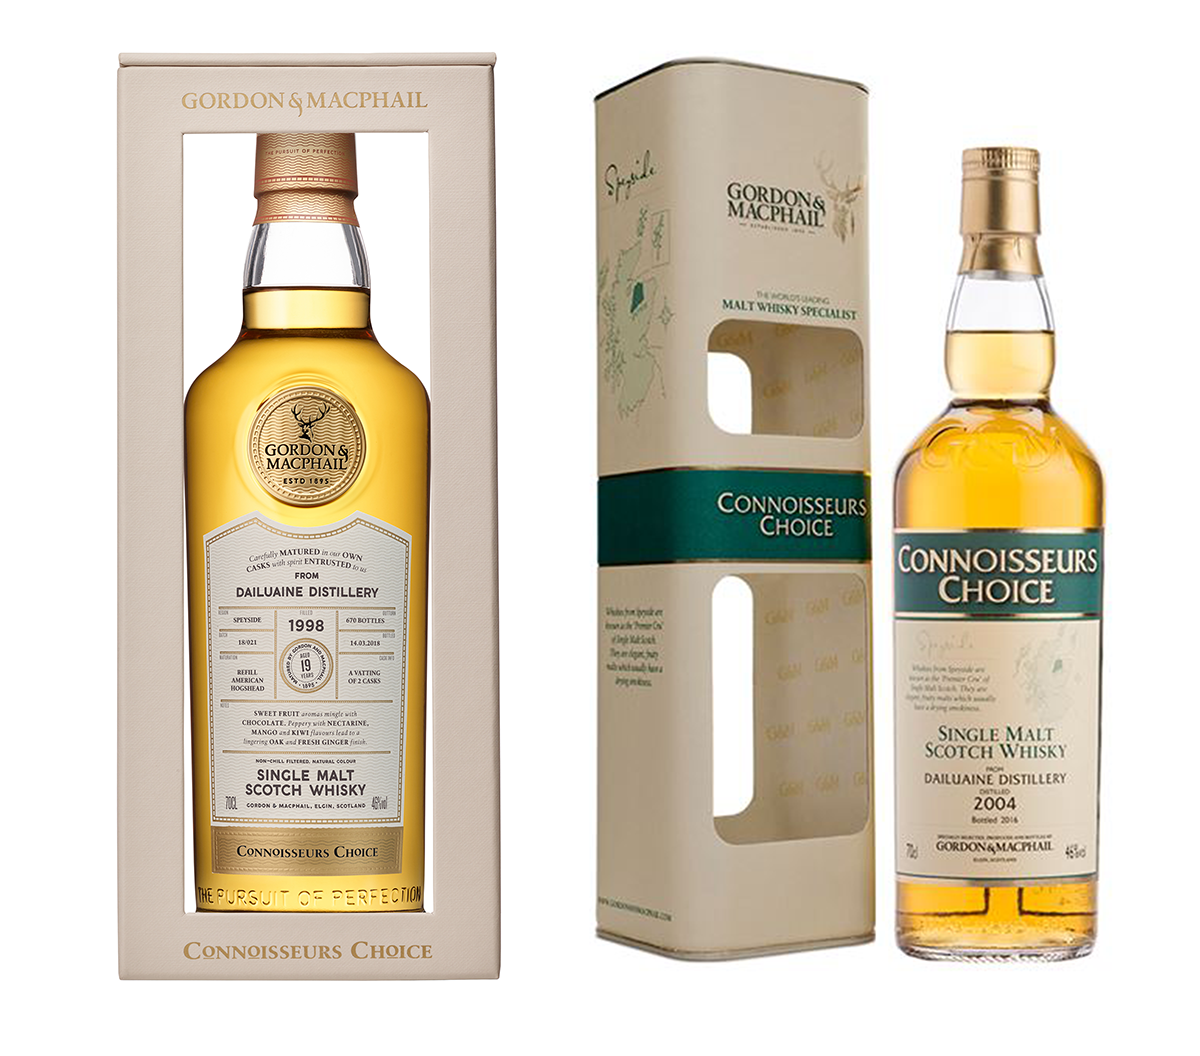 A comparison of the new Connoisseurs Choice packaging (L) with the current design (R). Images courtesy Gordon & MacPhail.